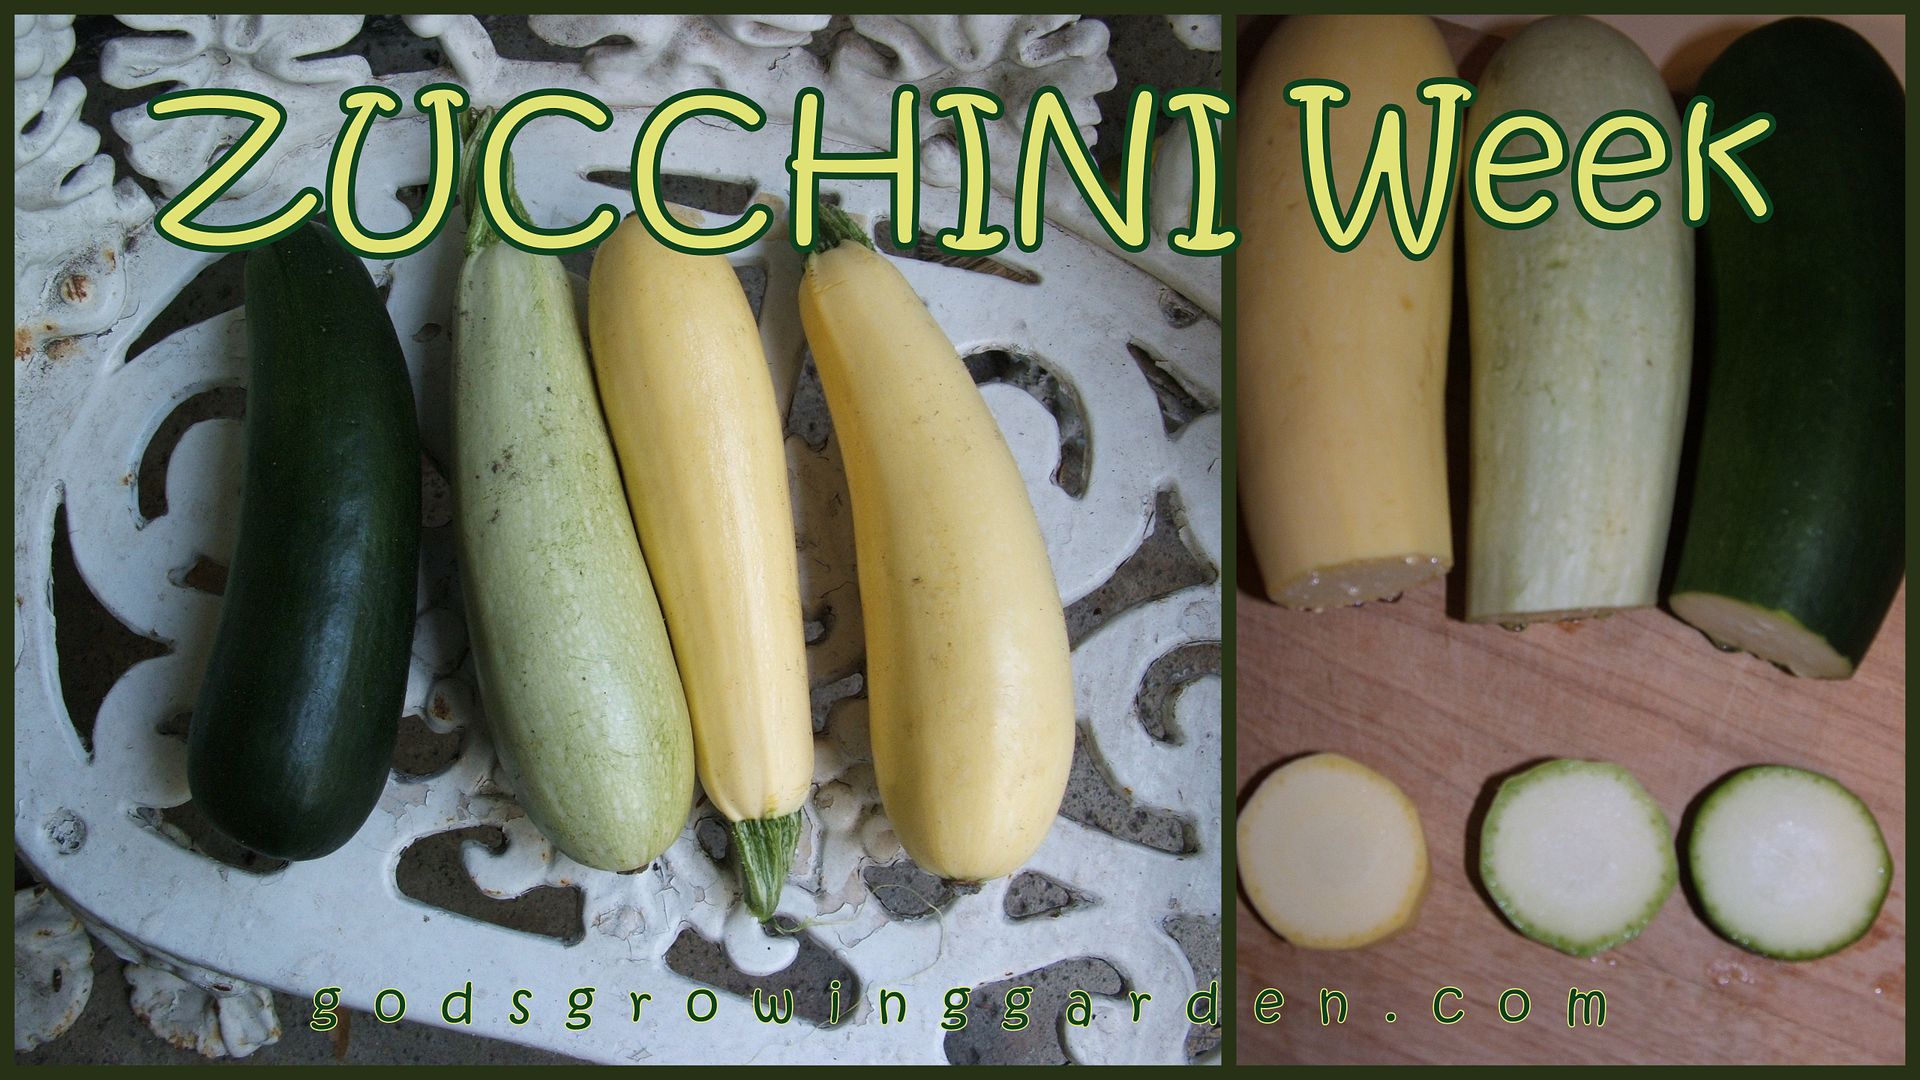 zucchini by Angie Ouellette-Tower for godsgrowinggarden.com photo 2012-08-01_zps2c472265.jpg